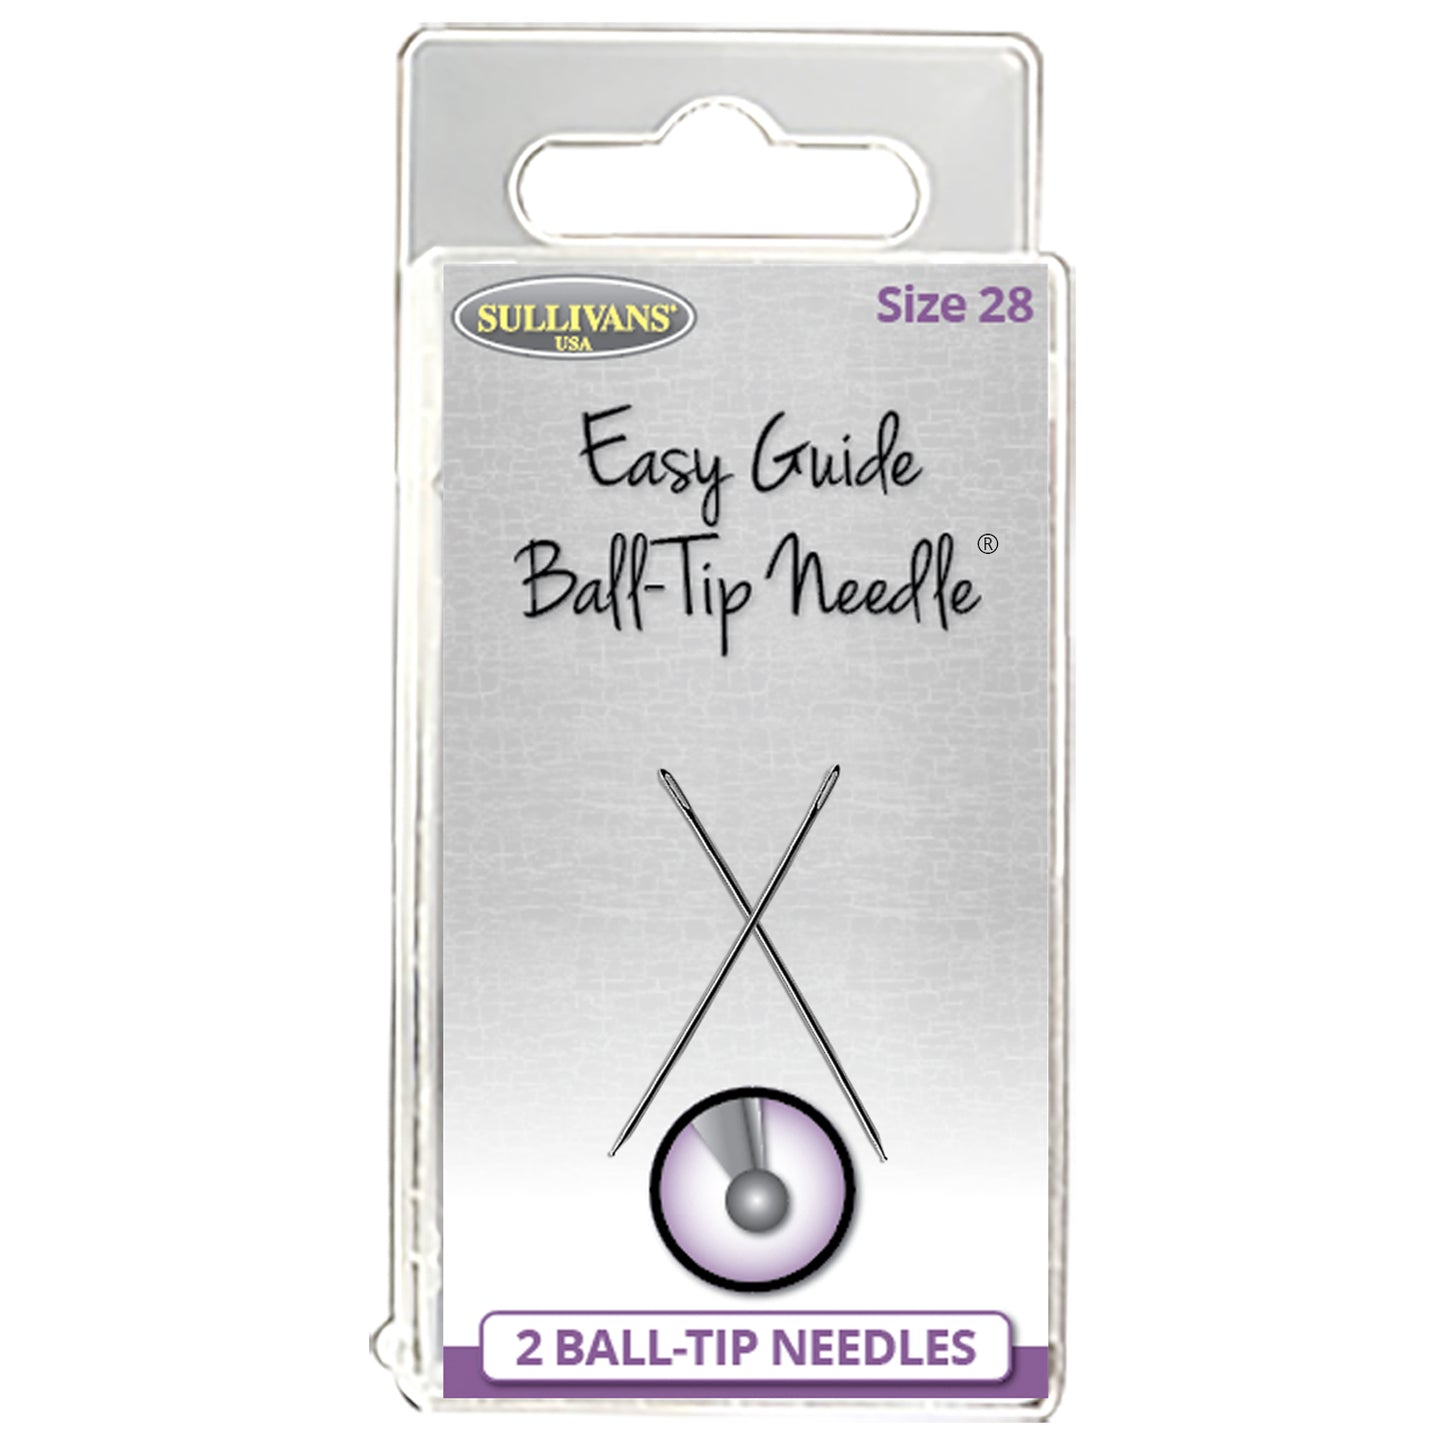 The Easy Guide Ball-Tip Needles No. 28 for Tapestry and Cross Stitch from Sullivans Needles: 2 Needles Imported Germany